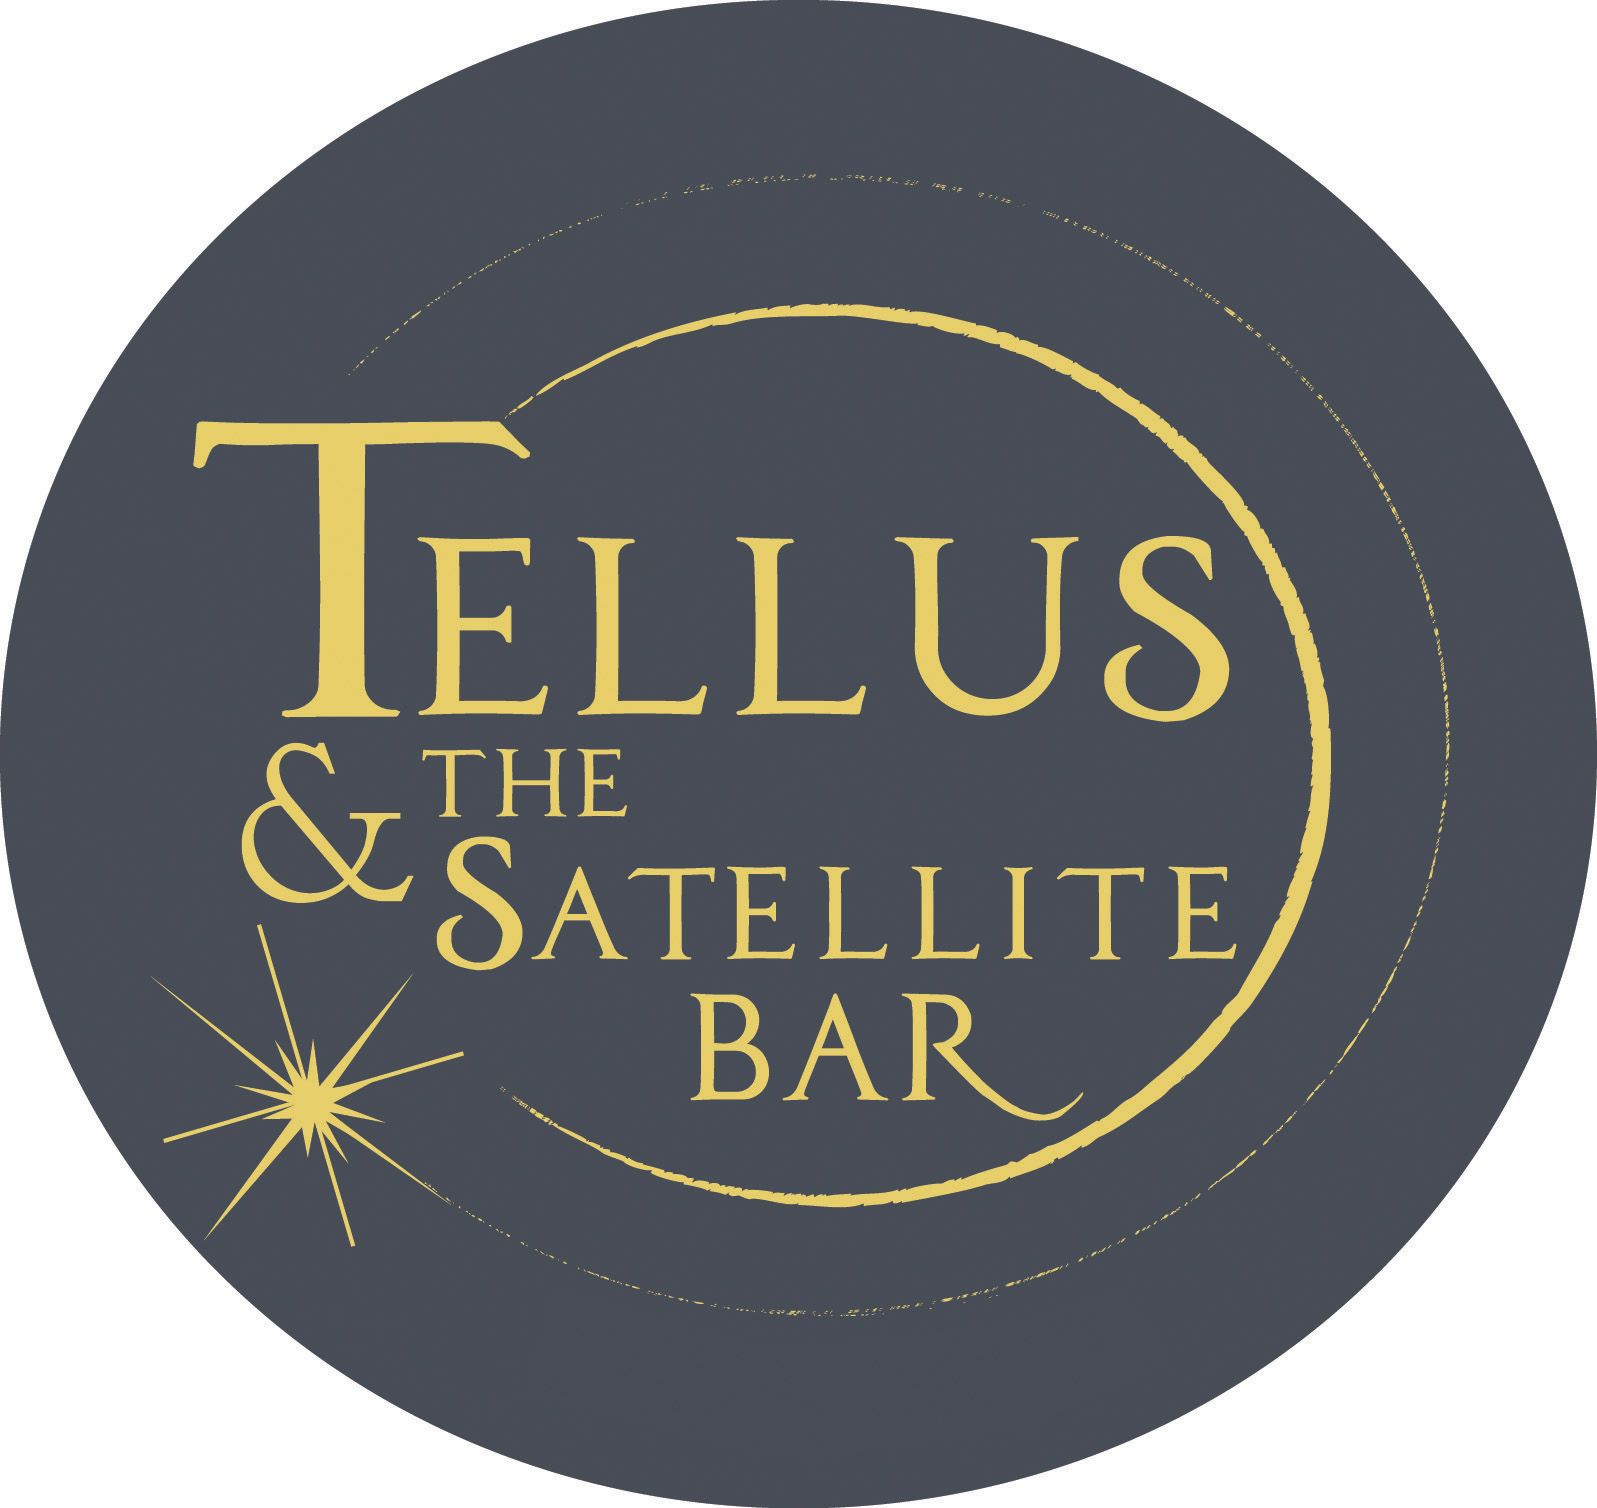 Tellus & the Satellite Bar is a restaurant and bar/nightclub featuring an ever-changing, homey menu and plenty of great cocktails.